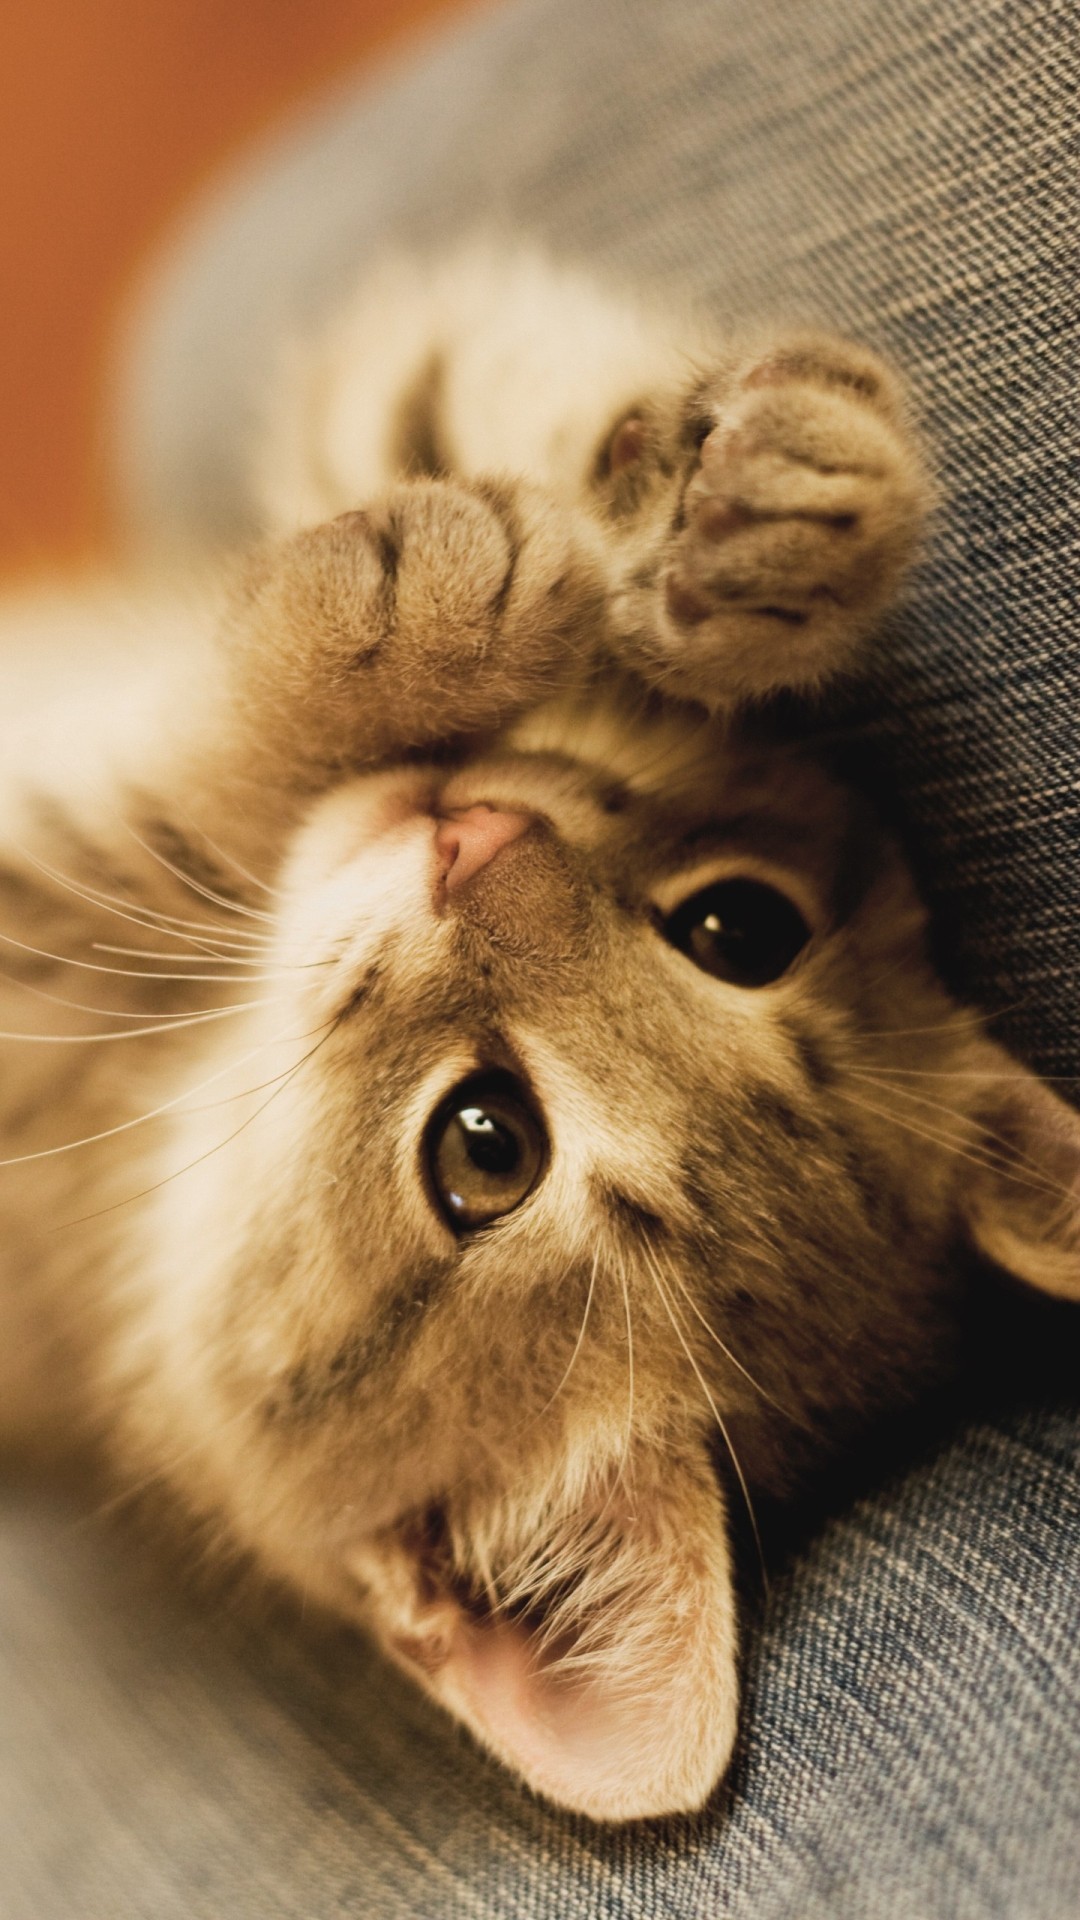 Cute Kittens Iphone Wallpapers